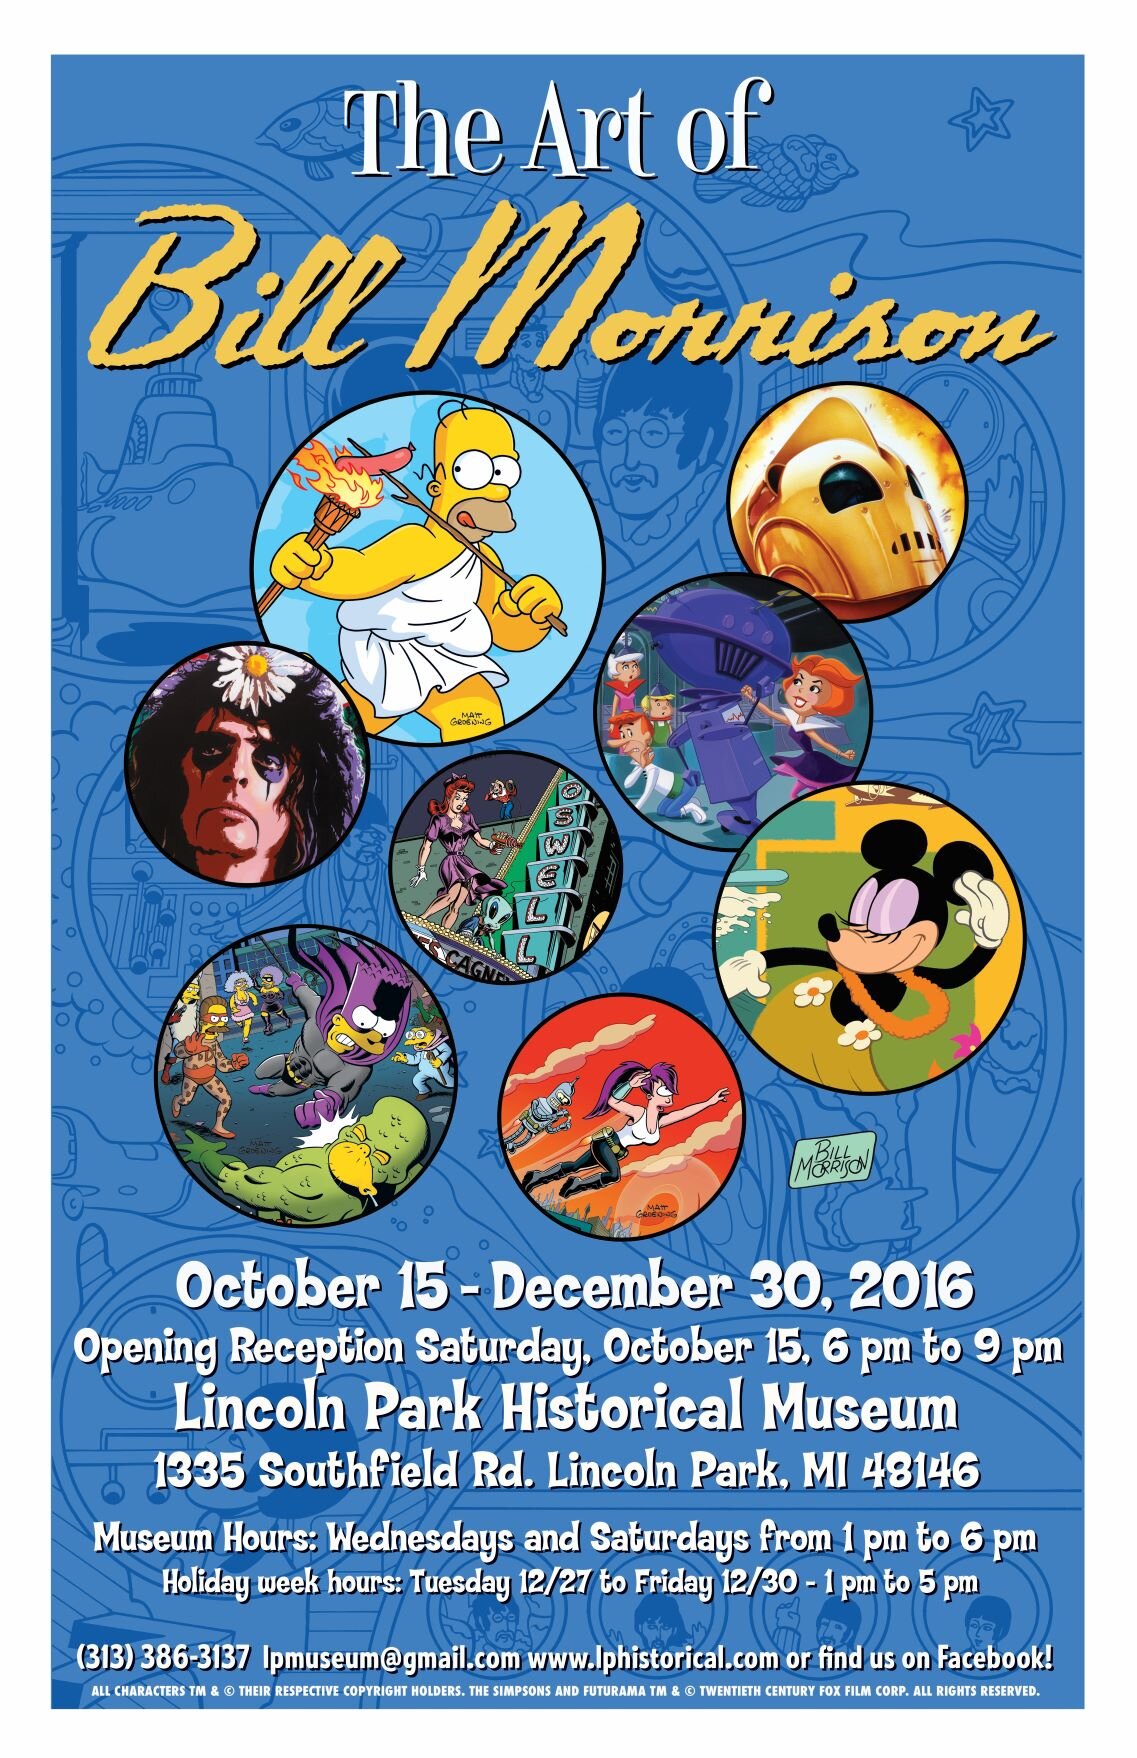 The Morrison-designed poster for the 2016 exhibit